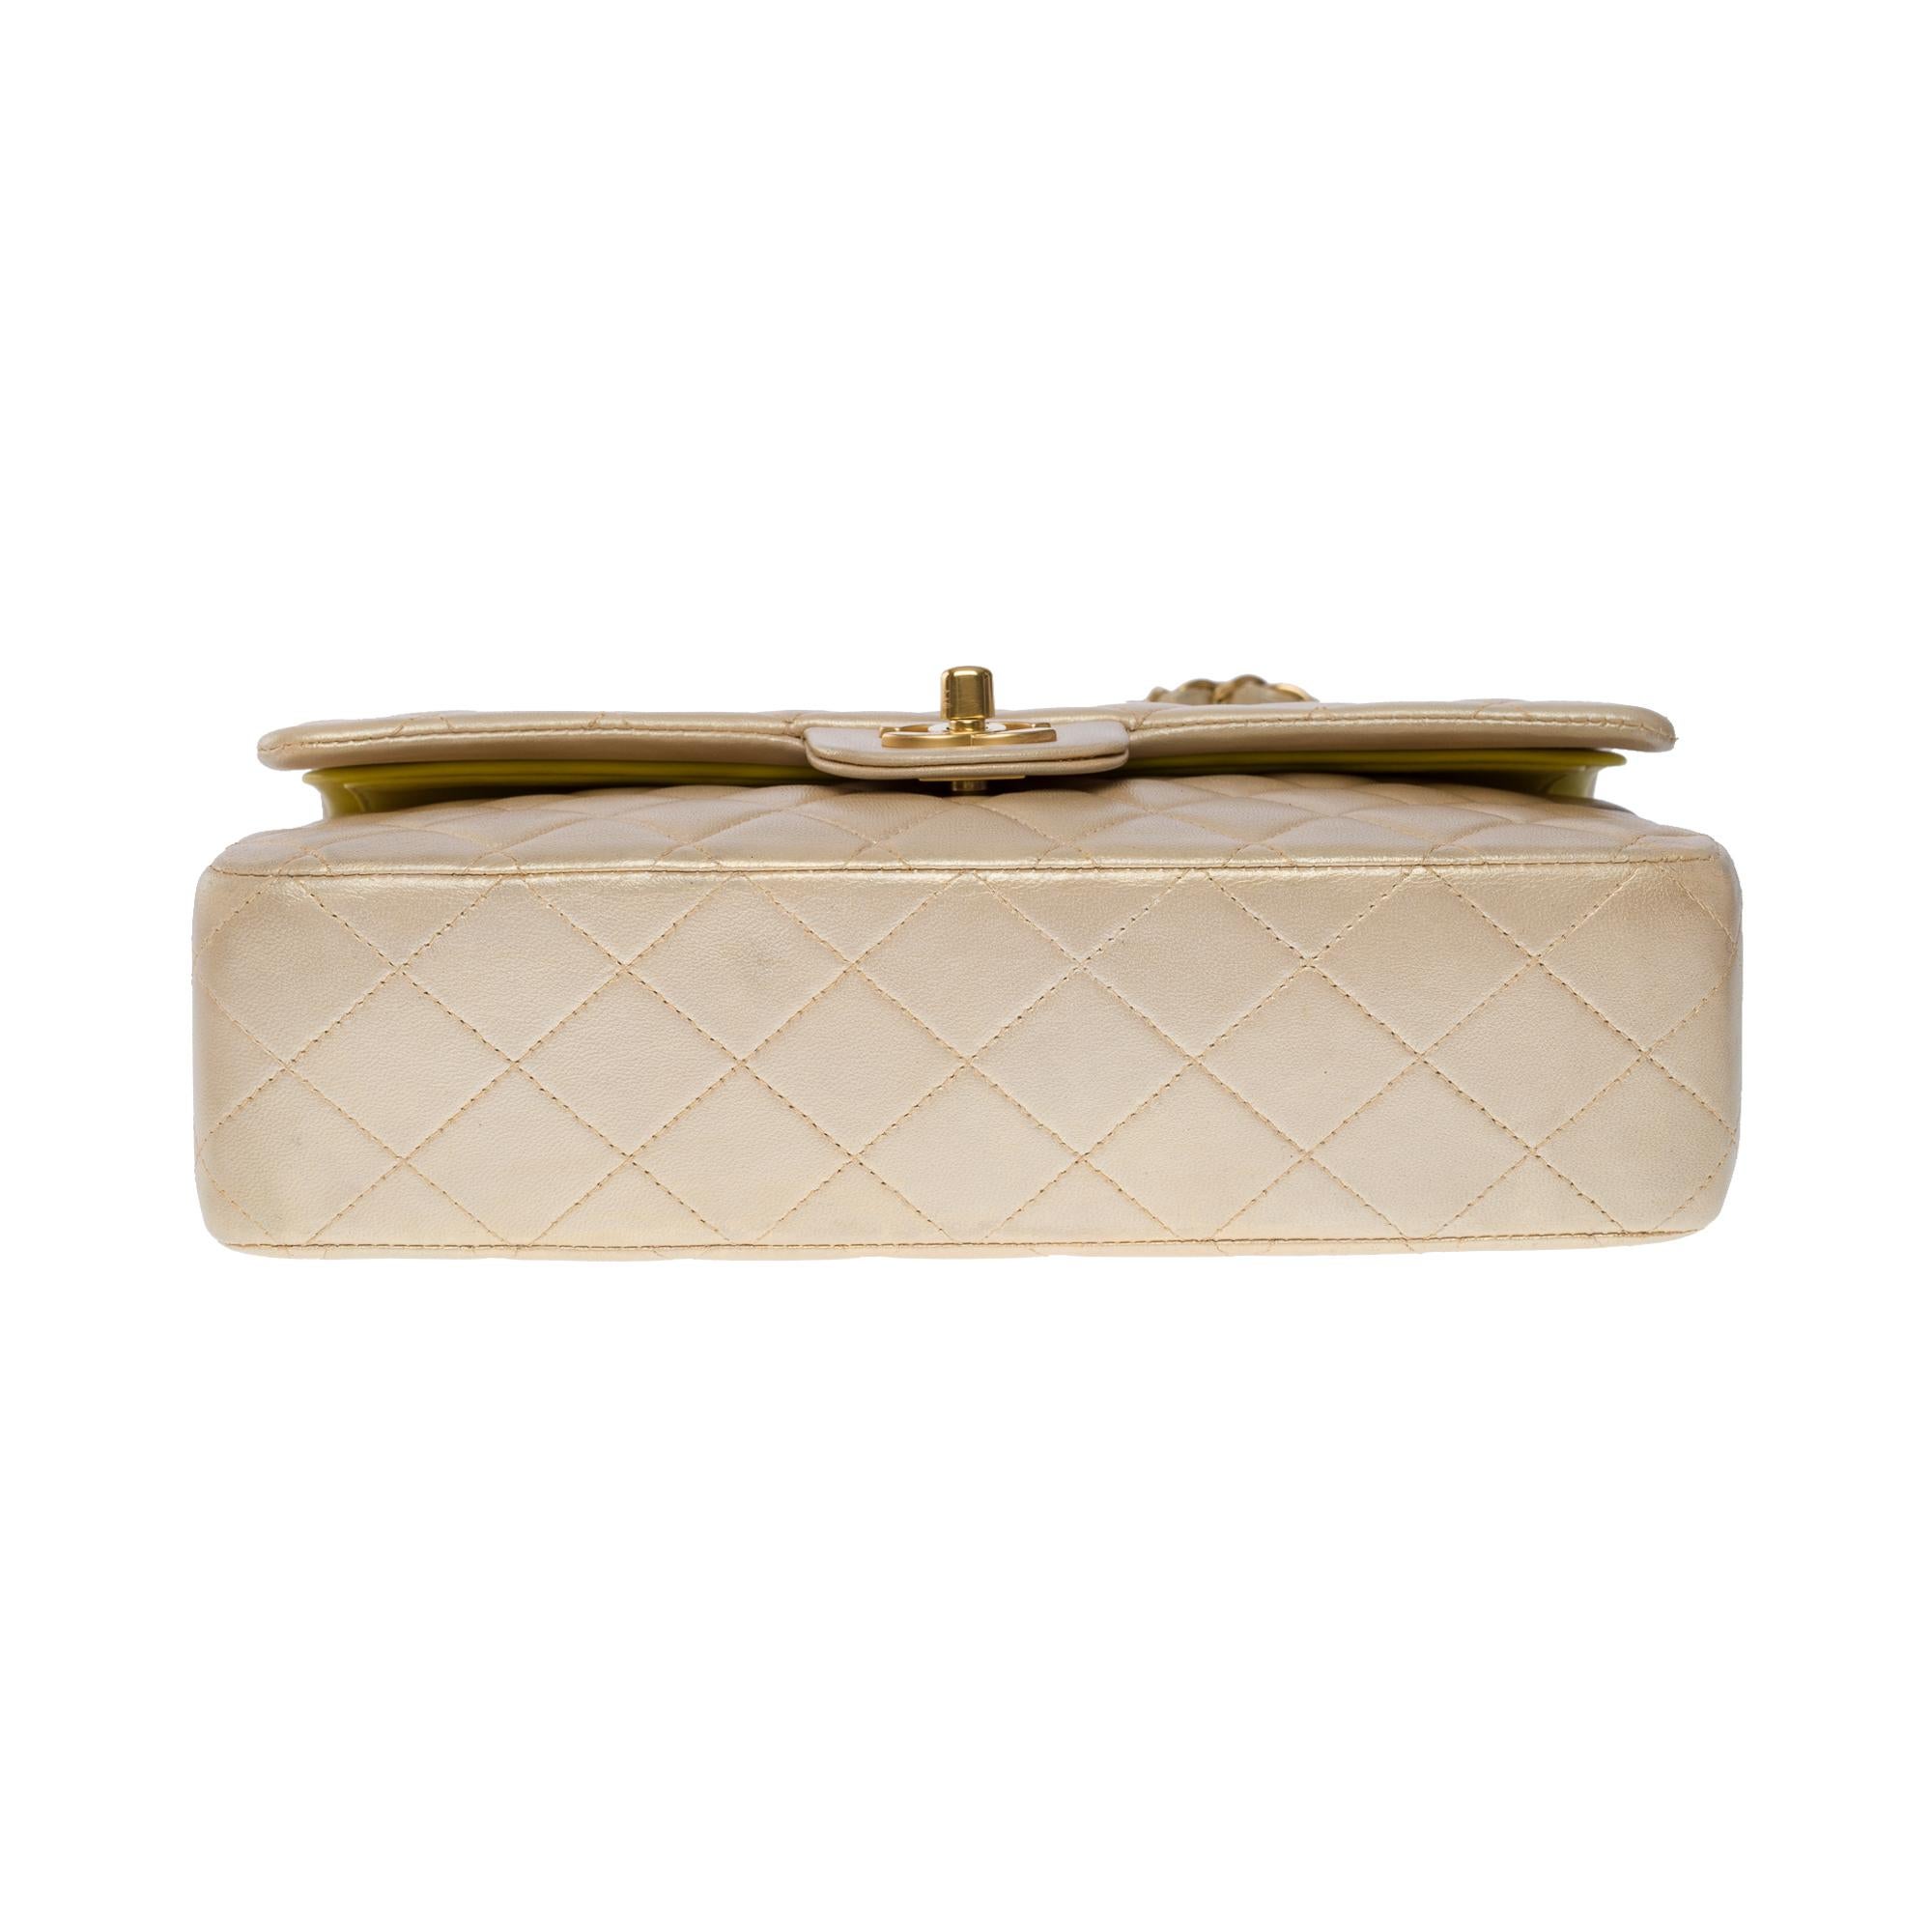 Chanel Timeless Medium double flap bag in iridescent gold quilted lambskin , GHW 6